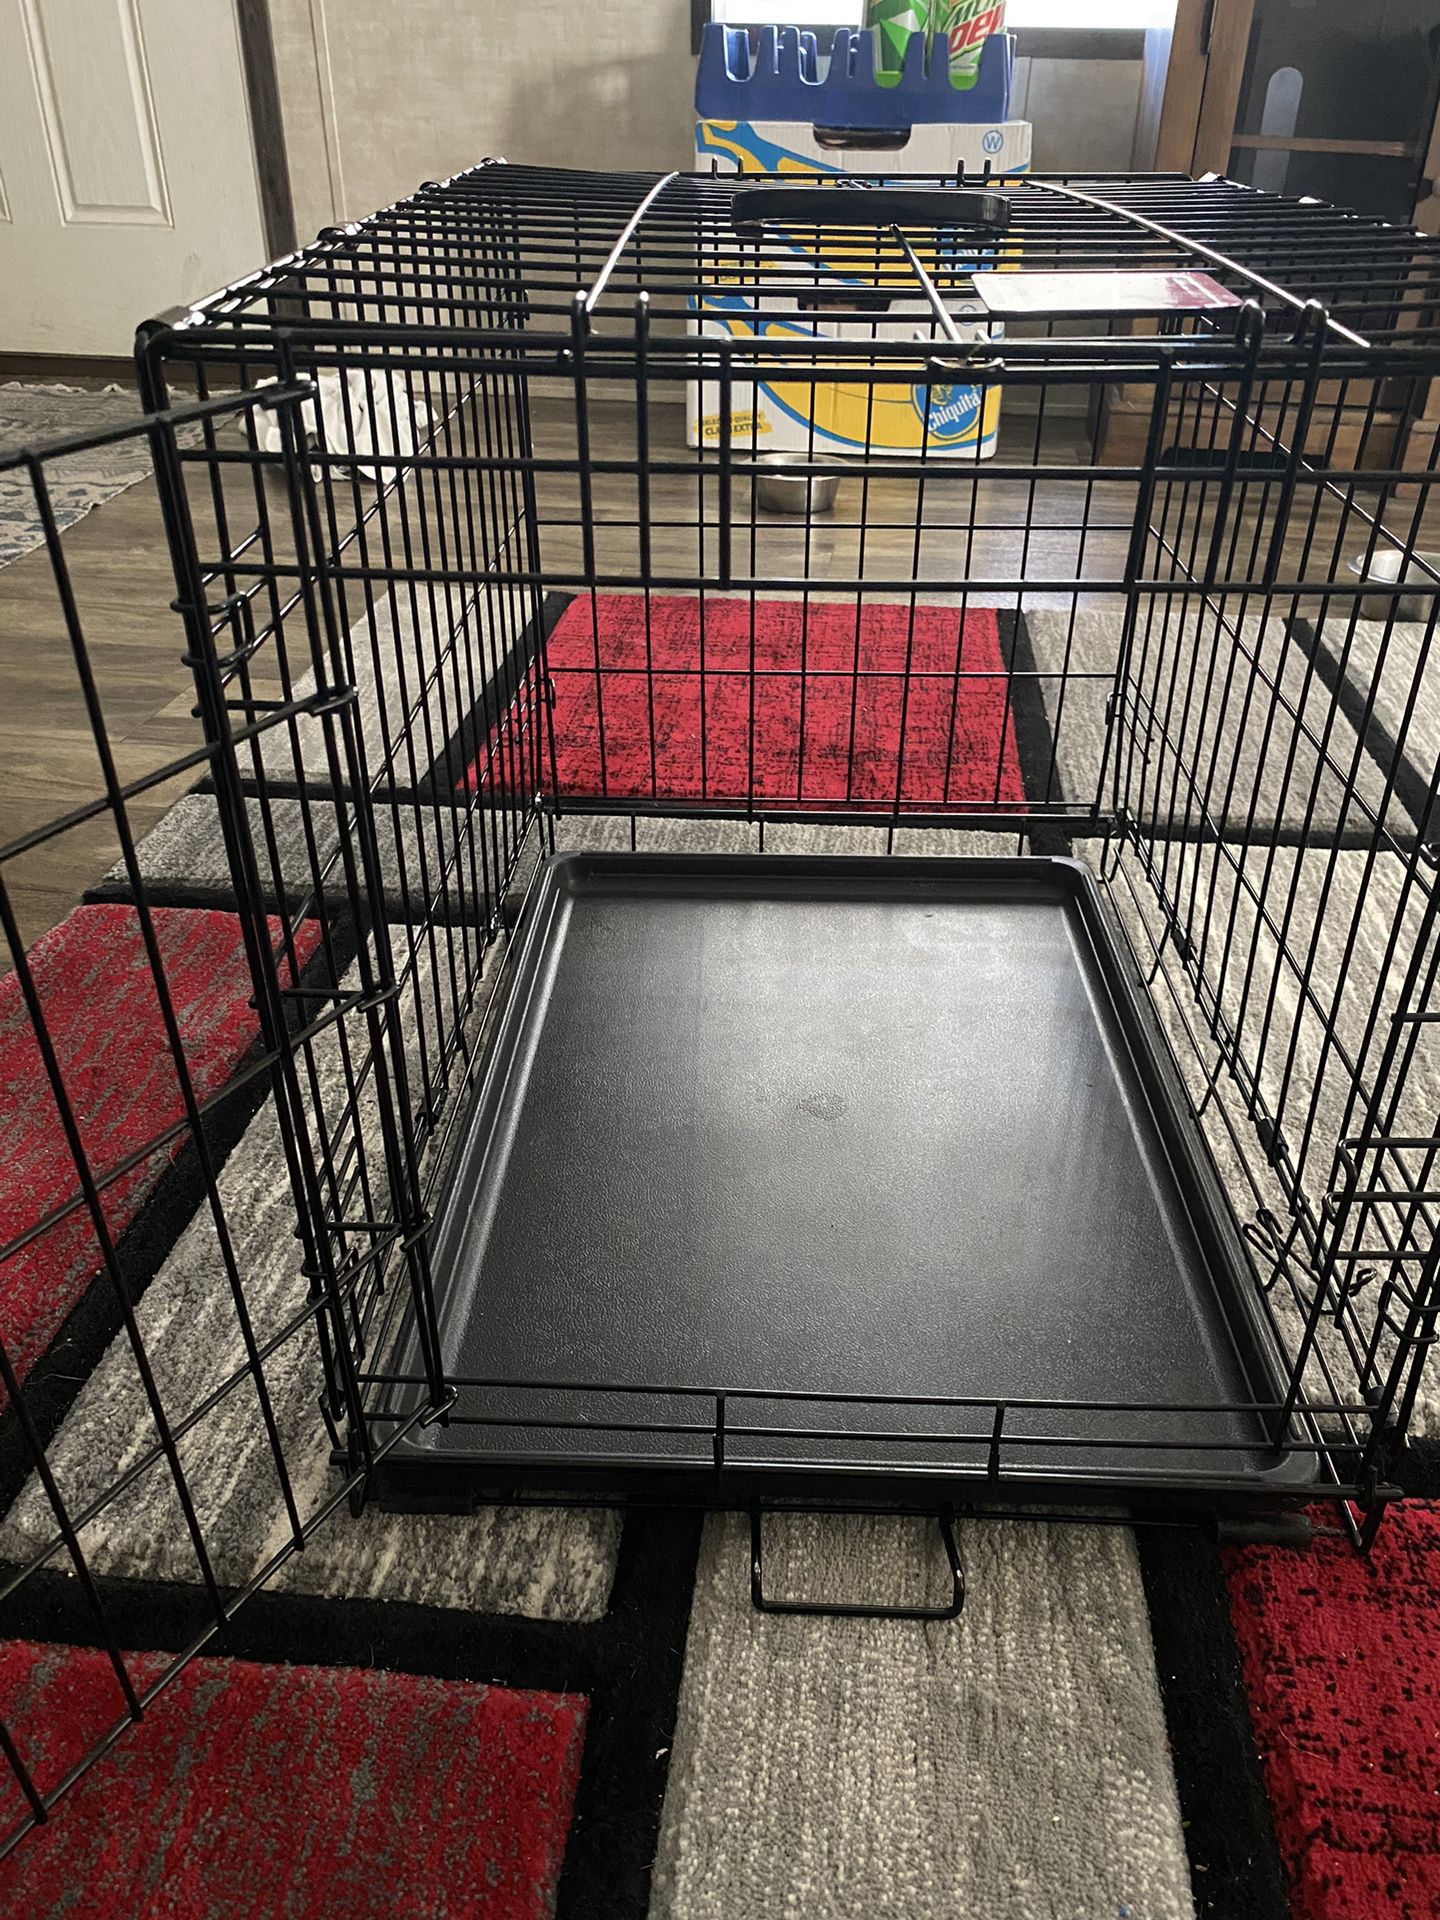 Barely Used Dog Cage 